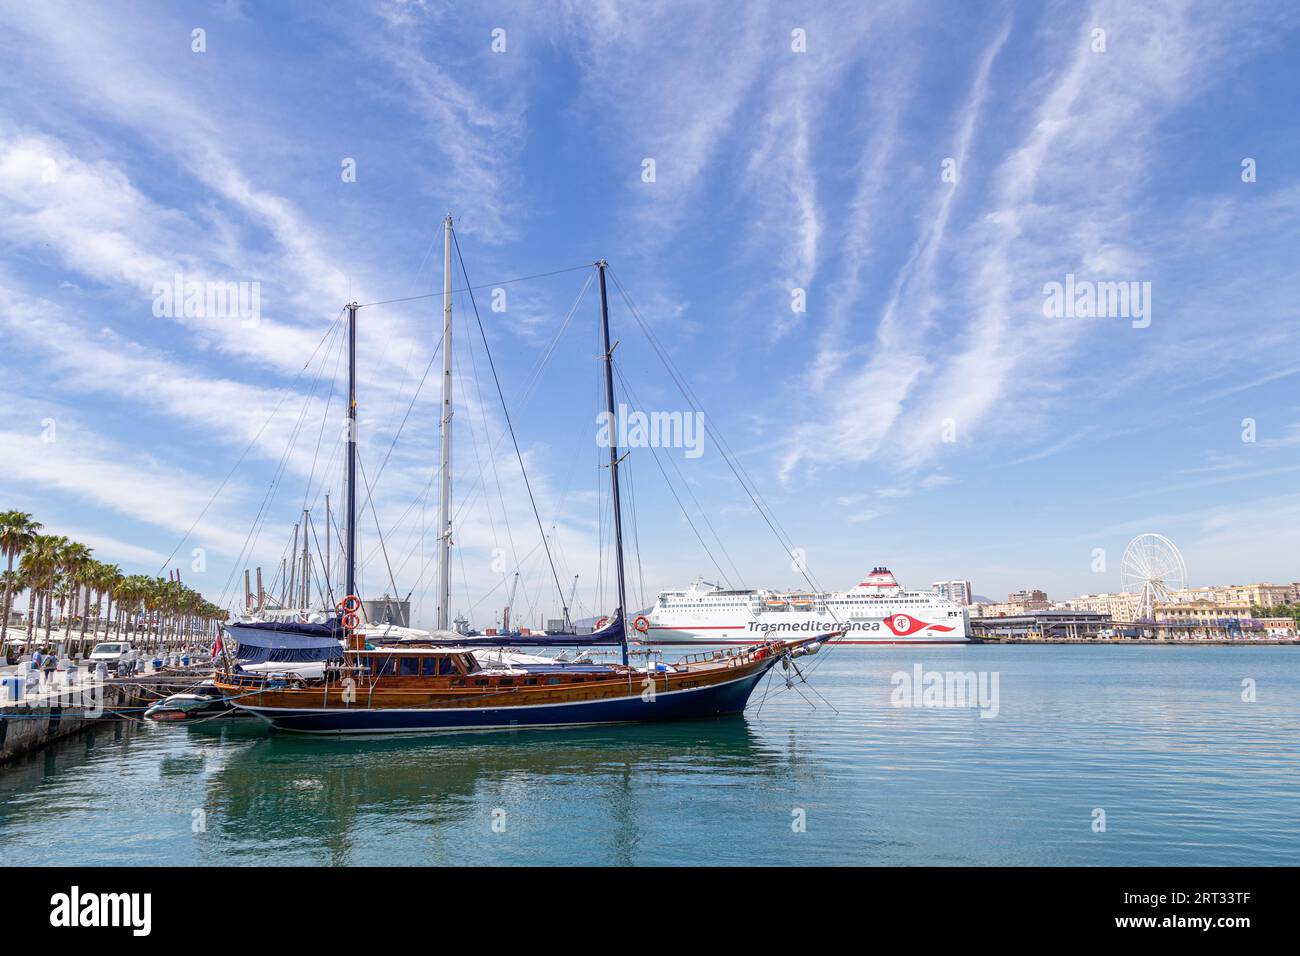 Malaga, Spain, May 24, 2019: A sailboat anchored in the harbour at the new Muello Uno district Stock Photo